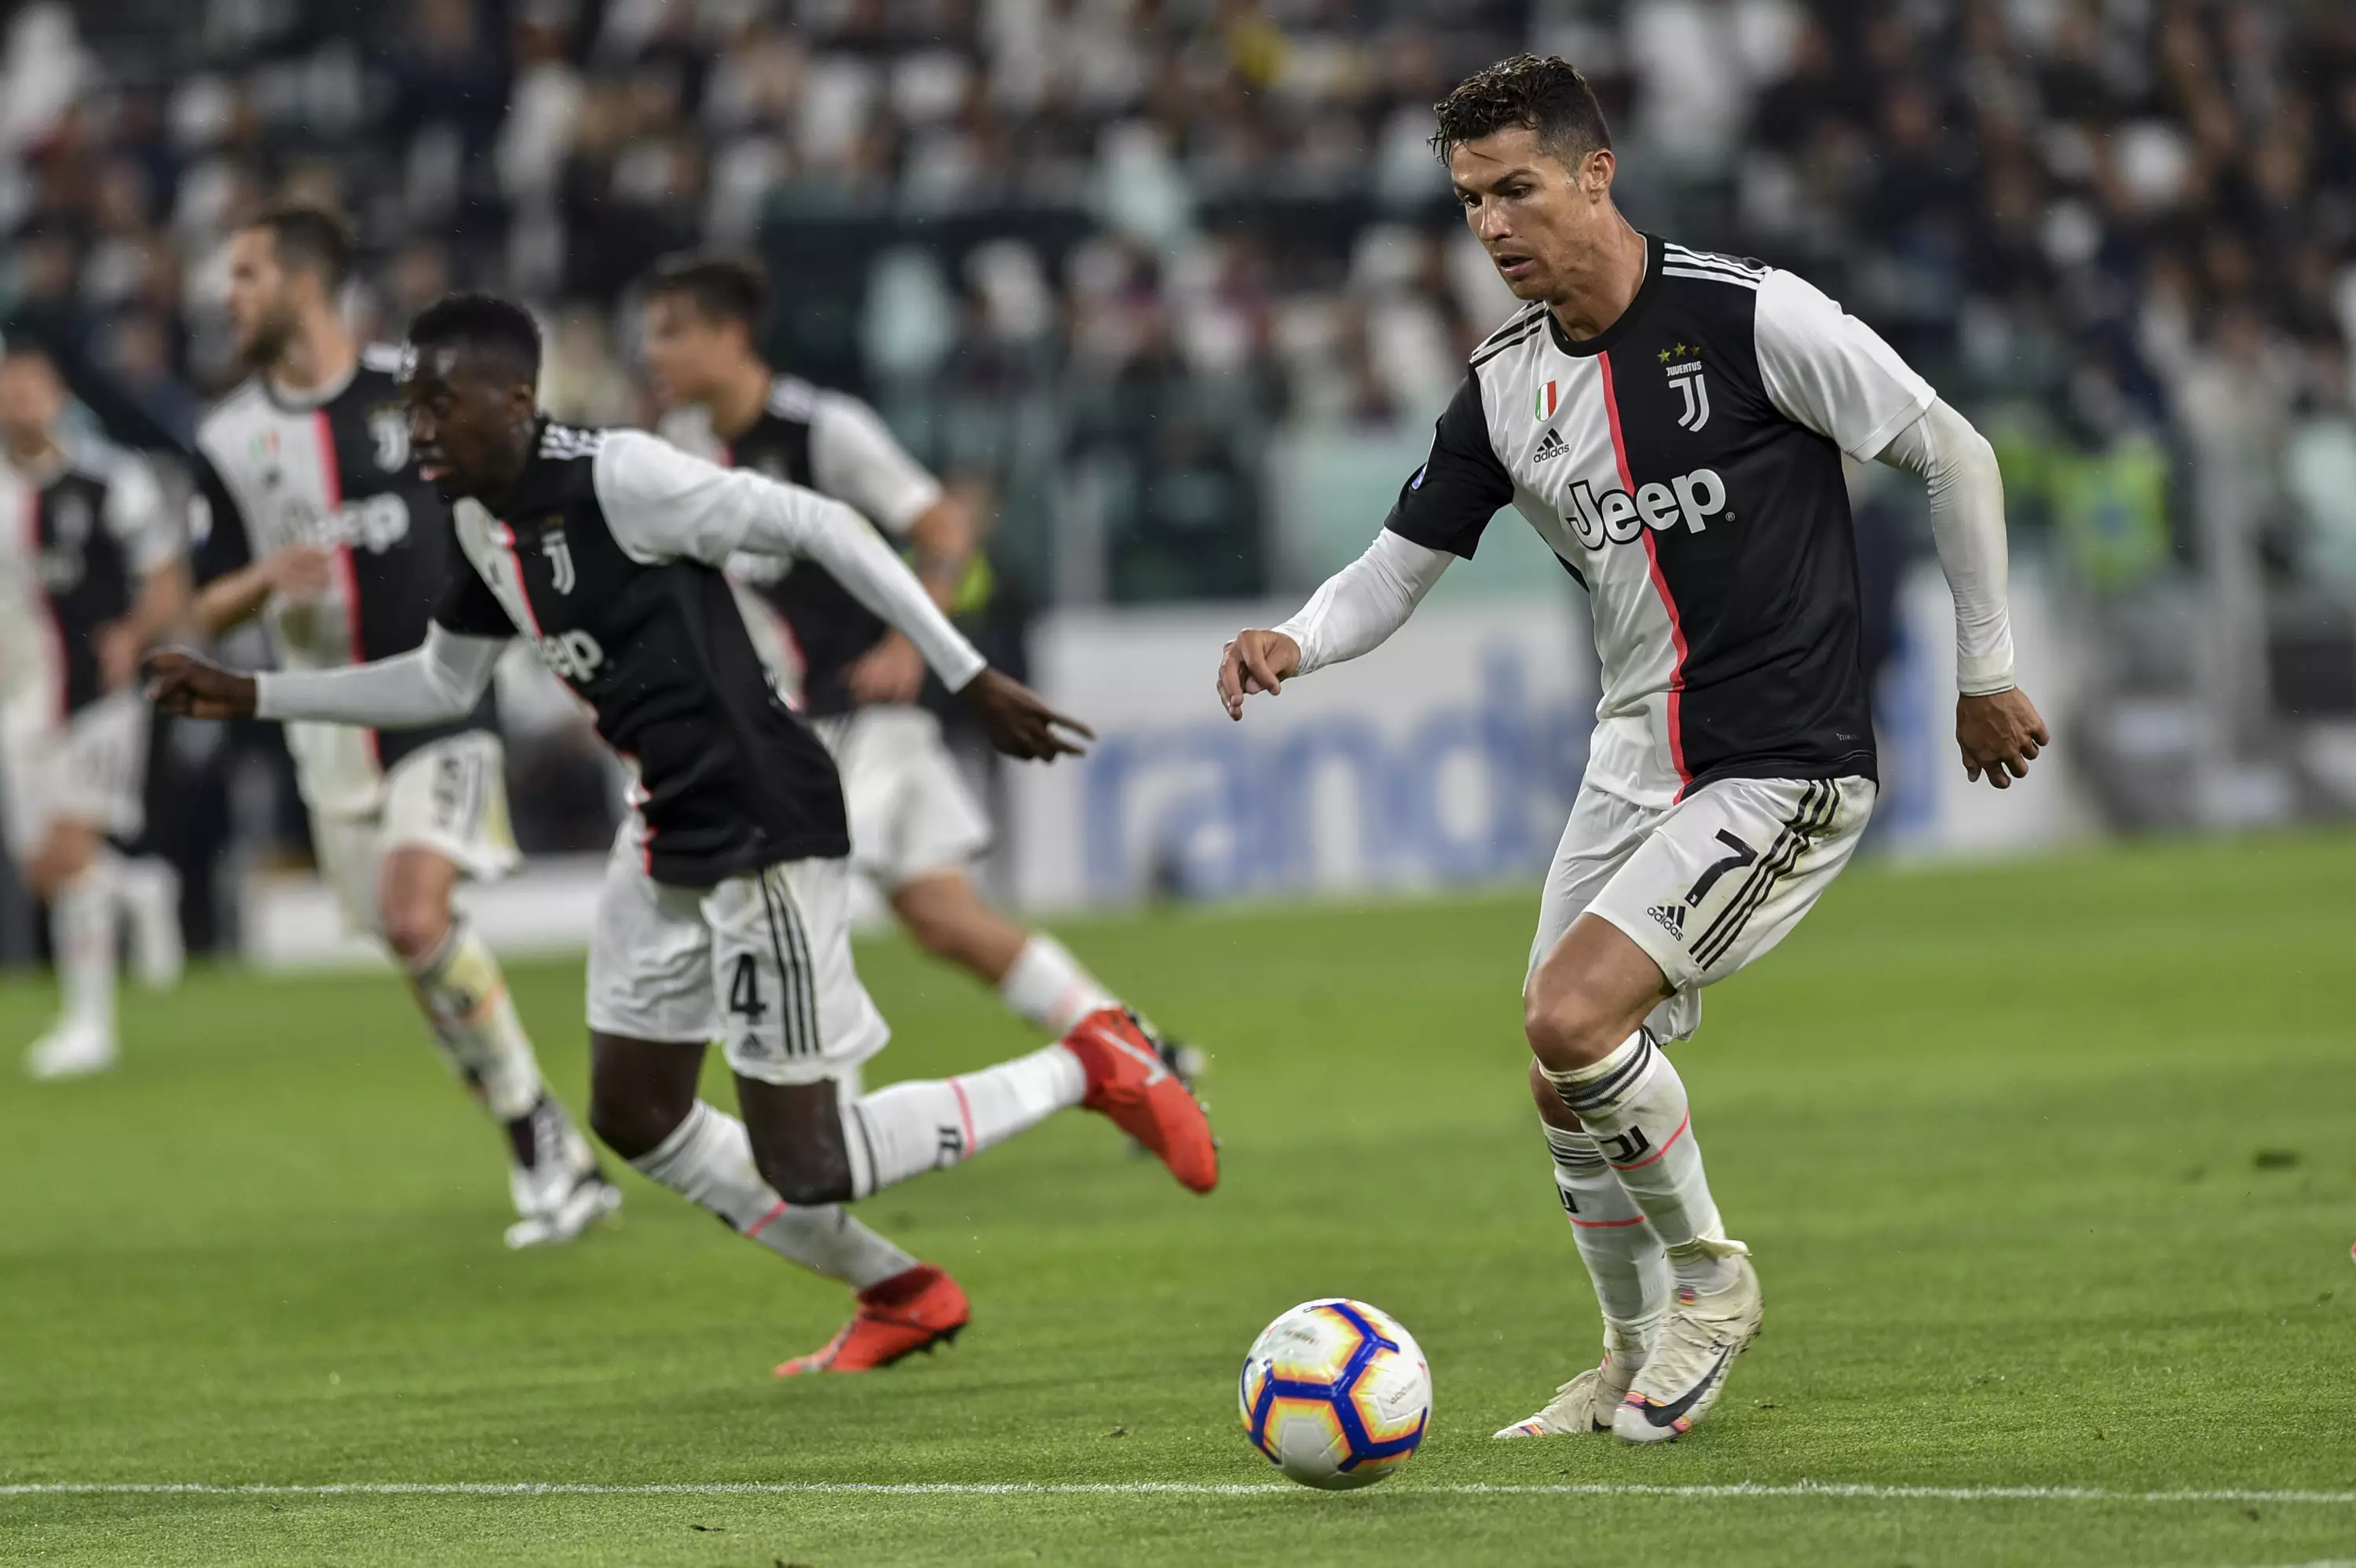 If you want to play with Ronaldo in his official Juventus kit, you'll need to buy PES 2020